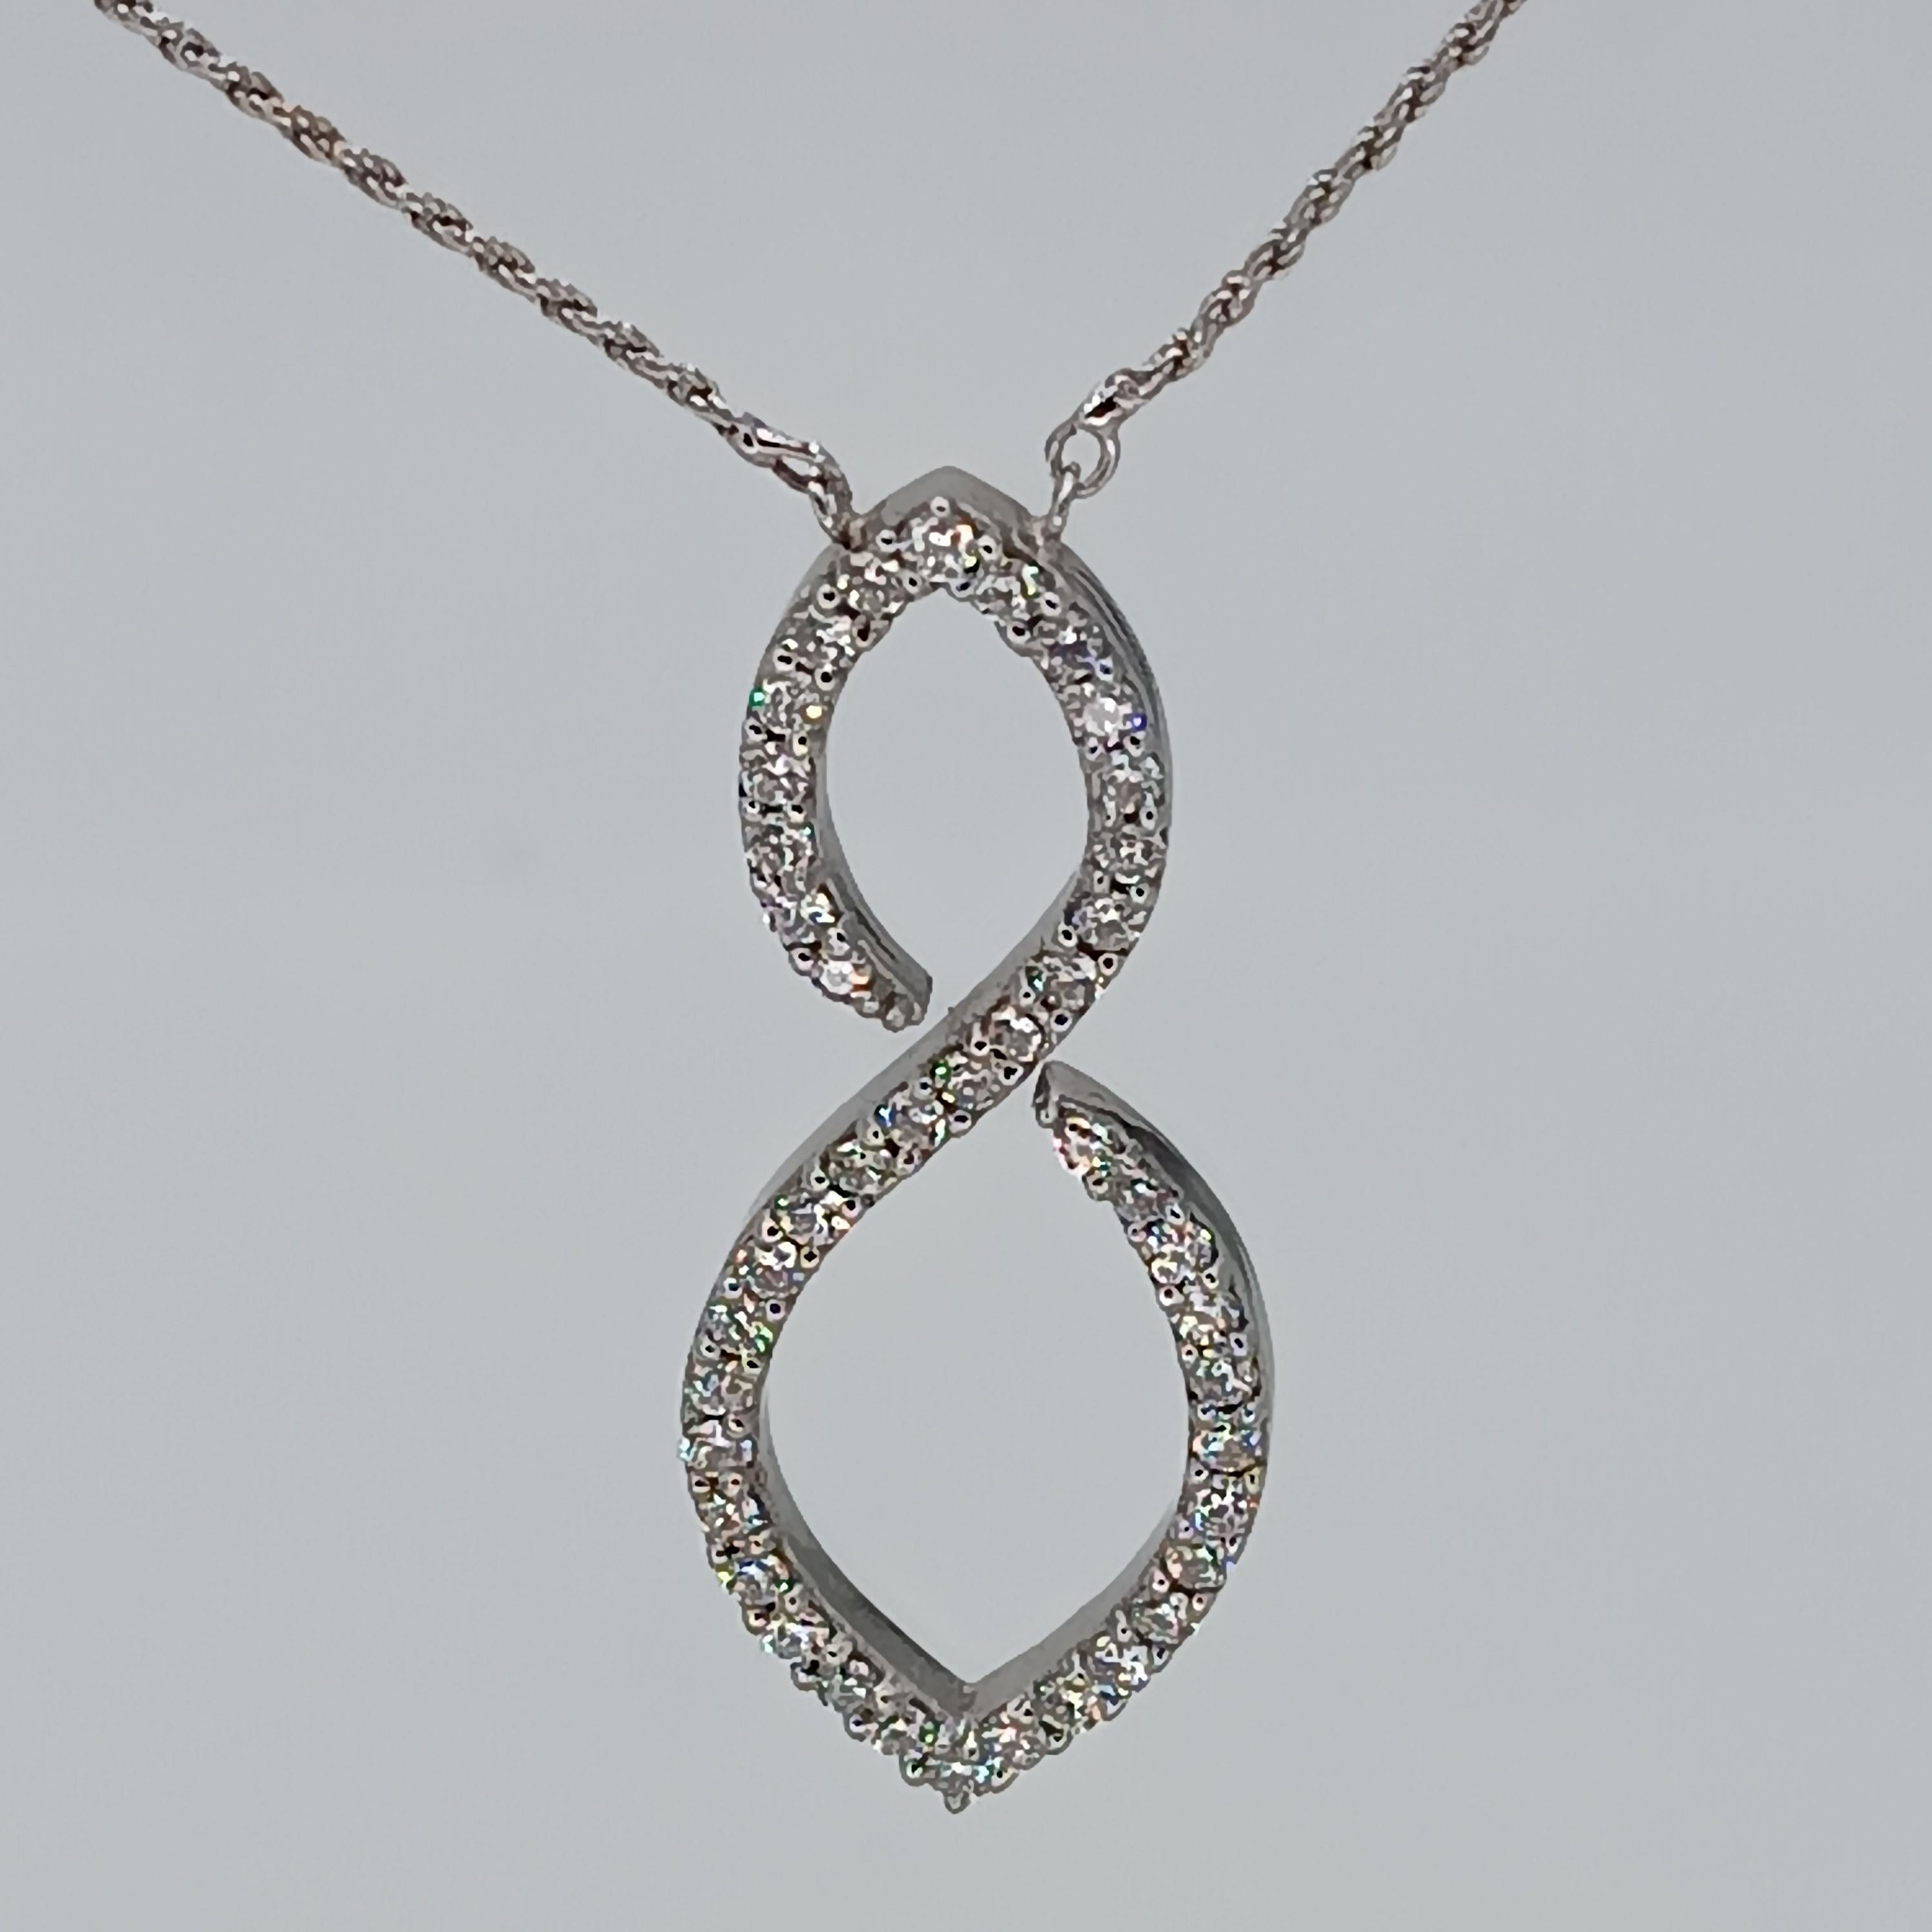 1.23 Carat Vs G Diamonds on 18 Carat White Gold Pendant the Object Weighs 10.29 For Sale 2